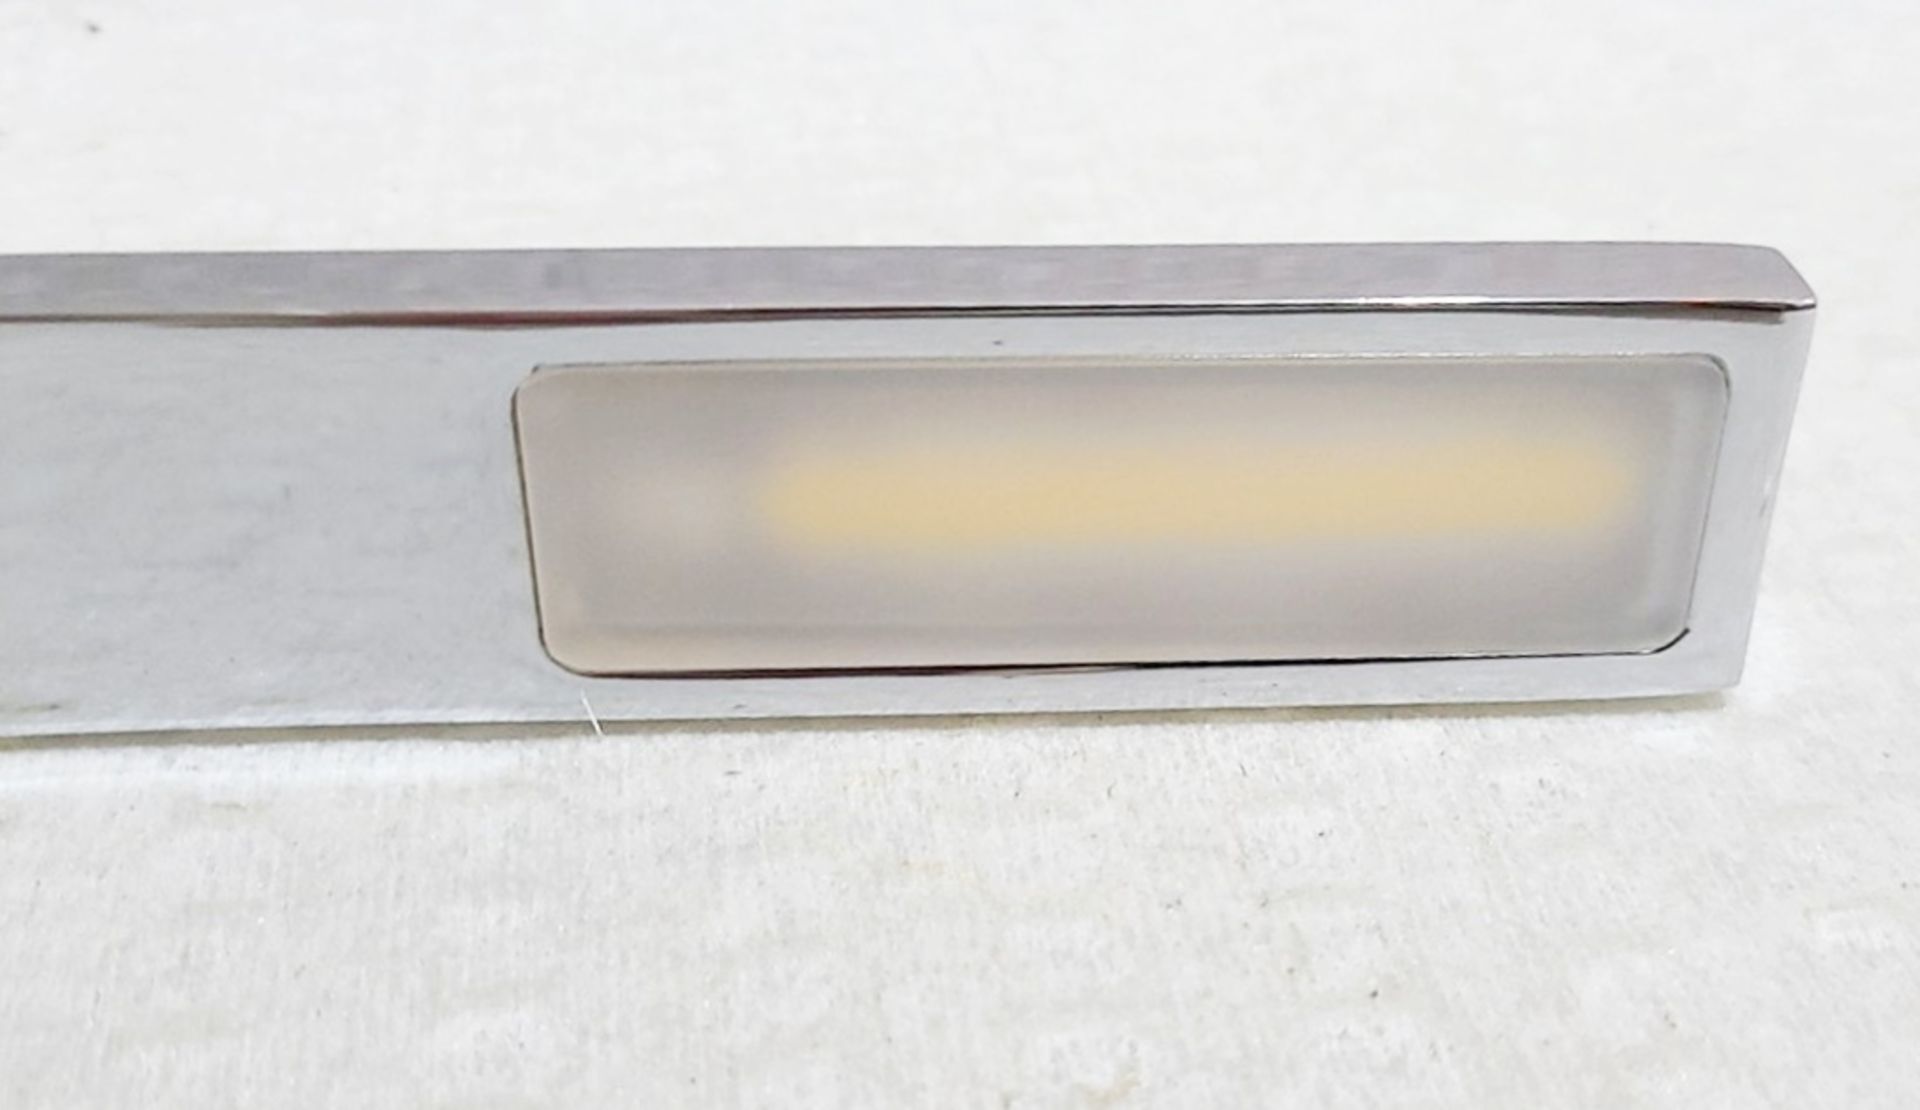 1 x SENSIO Hydra Sleek COB LED Technology Over Cabinet/Mirror Light With Acrylic Cover 165mm - Image 4 of 8